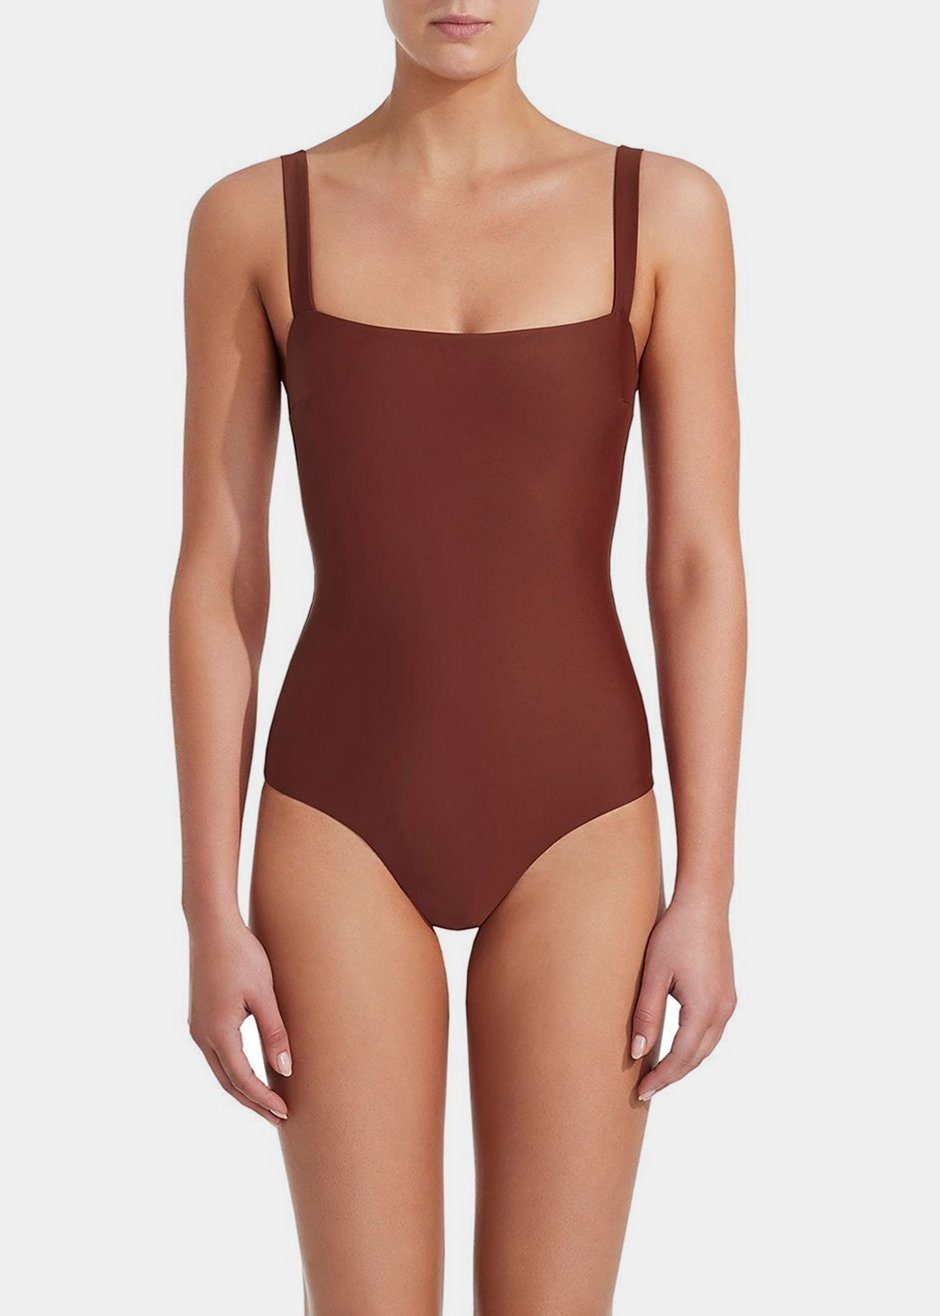 Square Maillot Swimsuit by Matteau- Rust